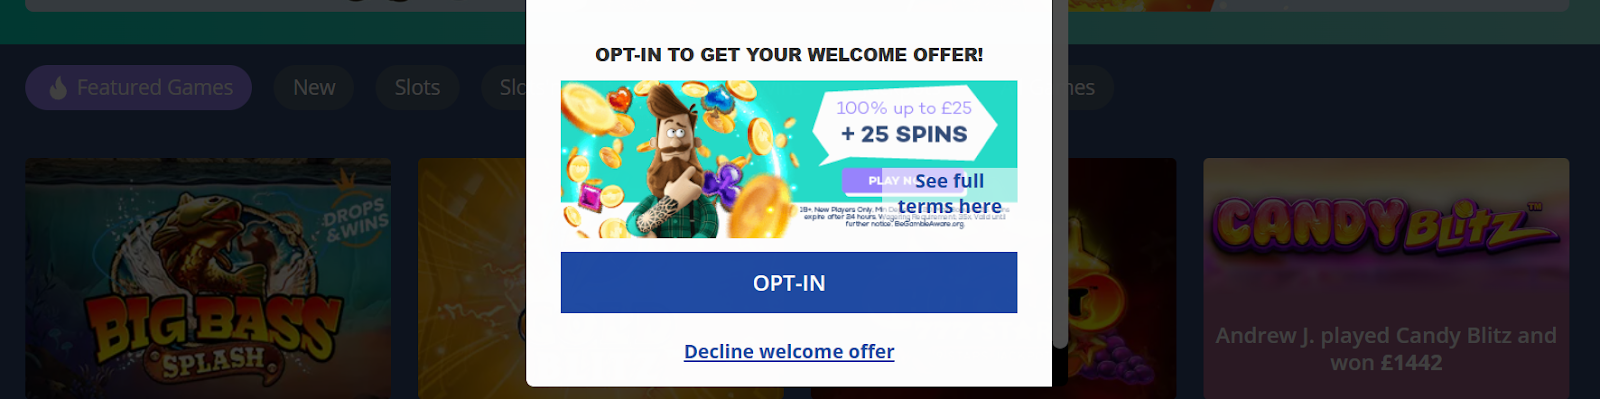 Jackie Jackpot opt-in